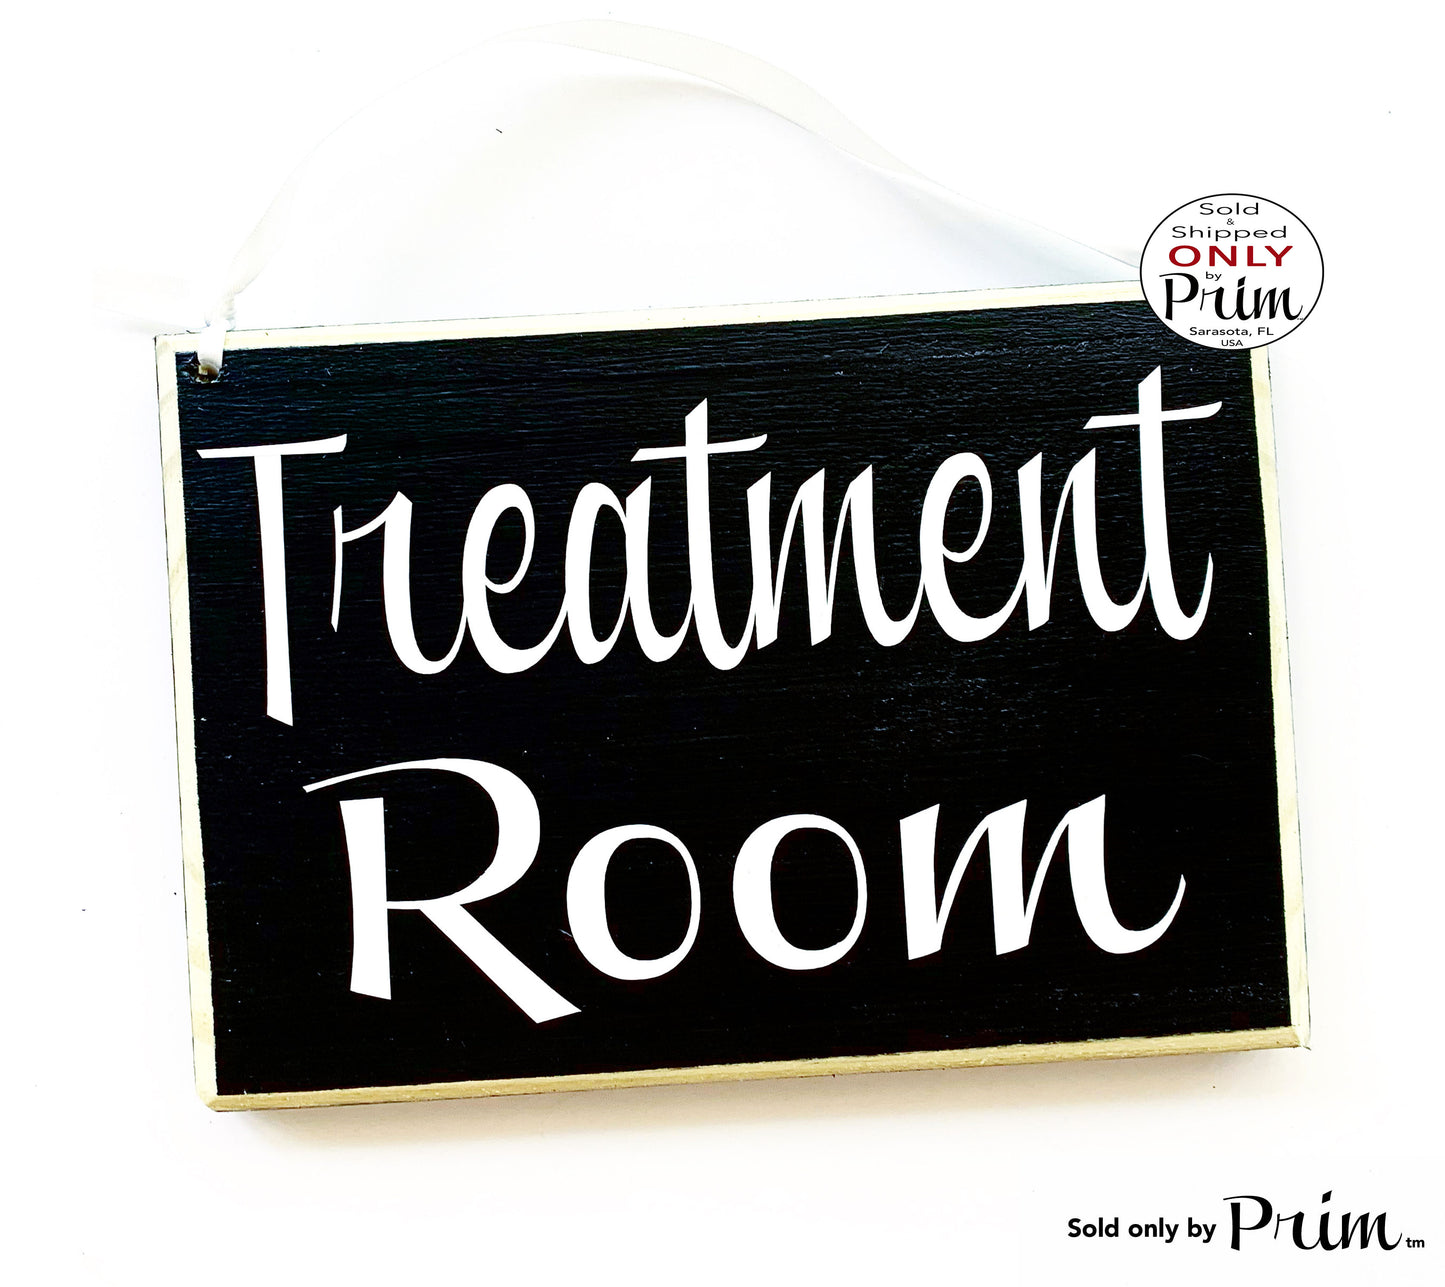 8x6 Treatment Room Custom Wood Sign Spa Facial Massage Lashes Brows Waxing In Session Progress Please Do Not Disturb Door Wall Plaque Designs by Prim